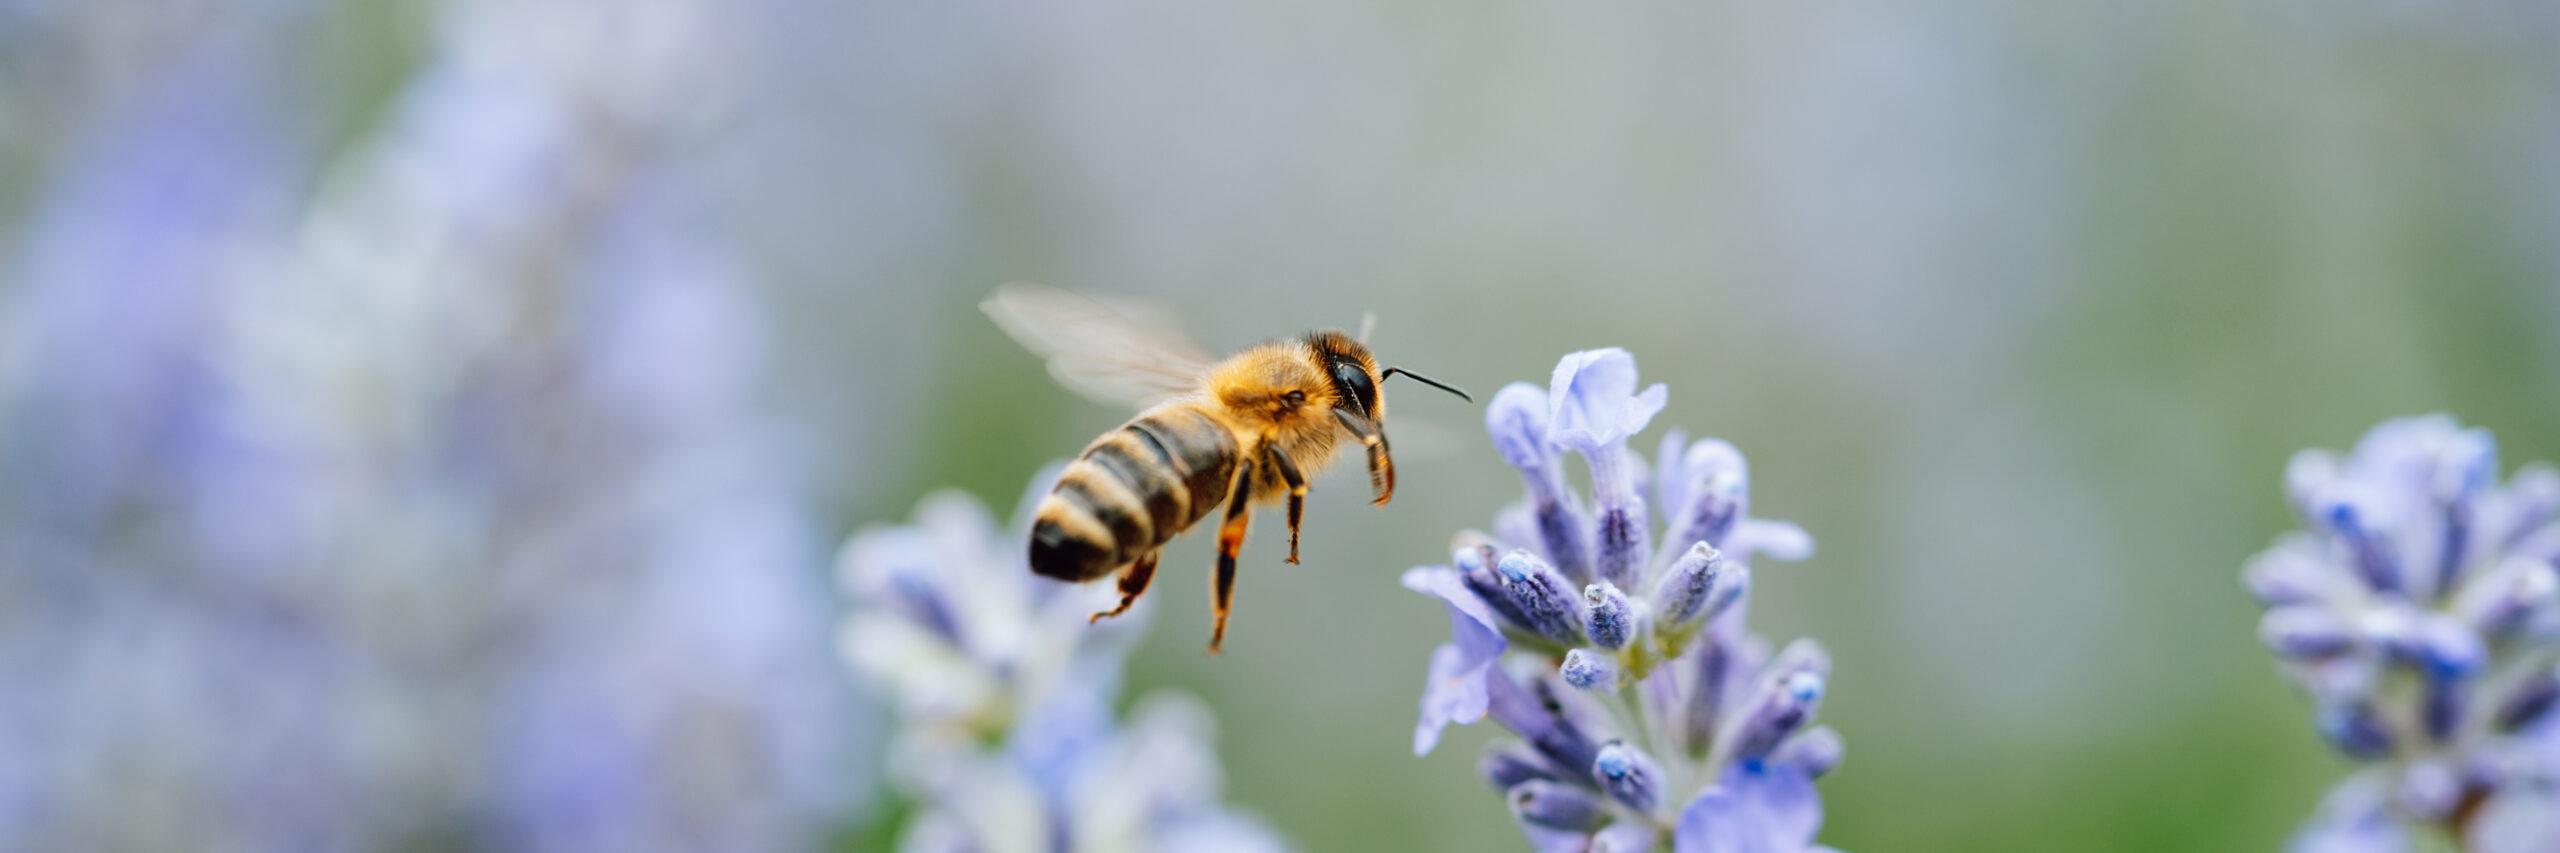 Honey Bee On Lavender Blossoms